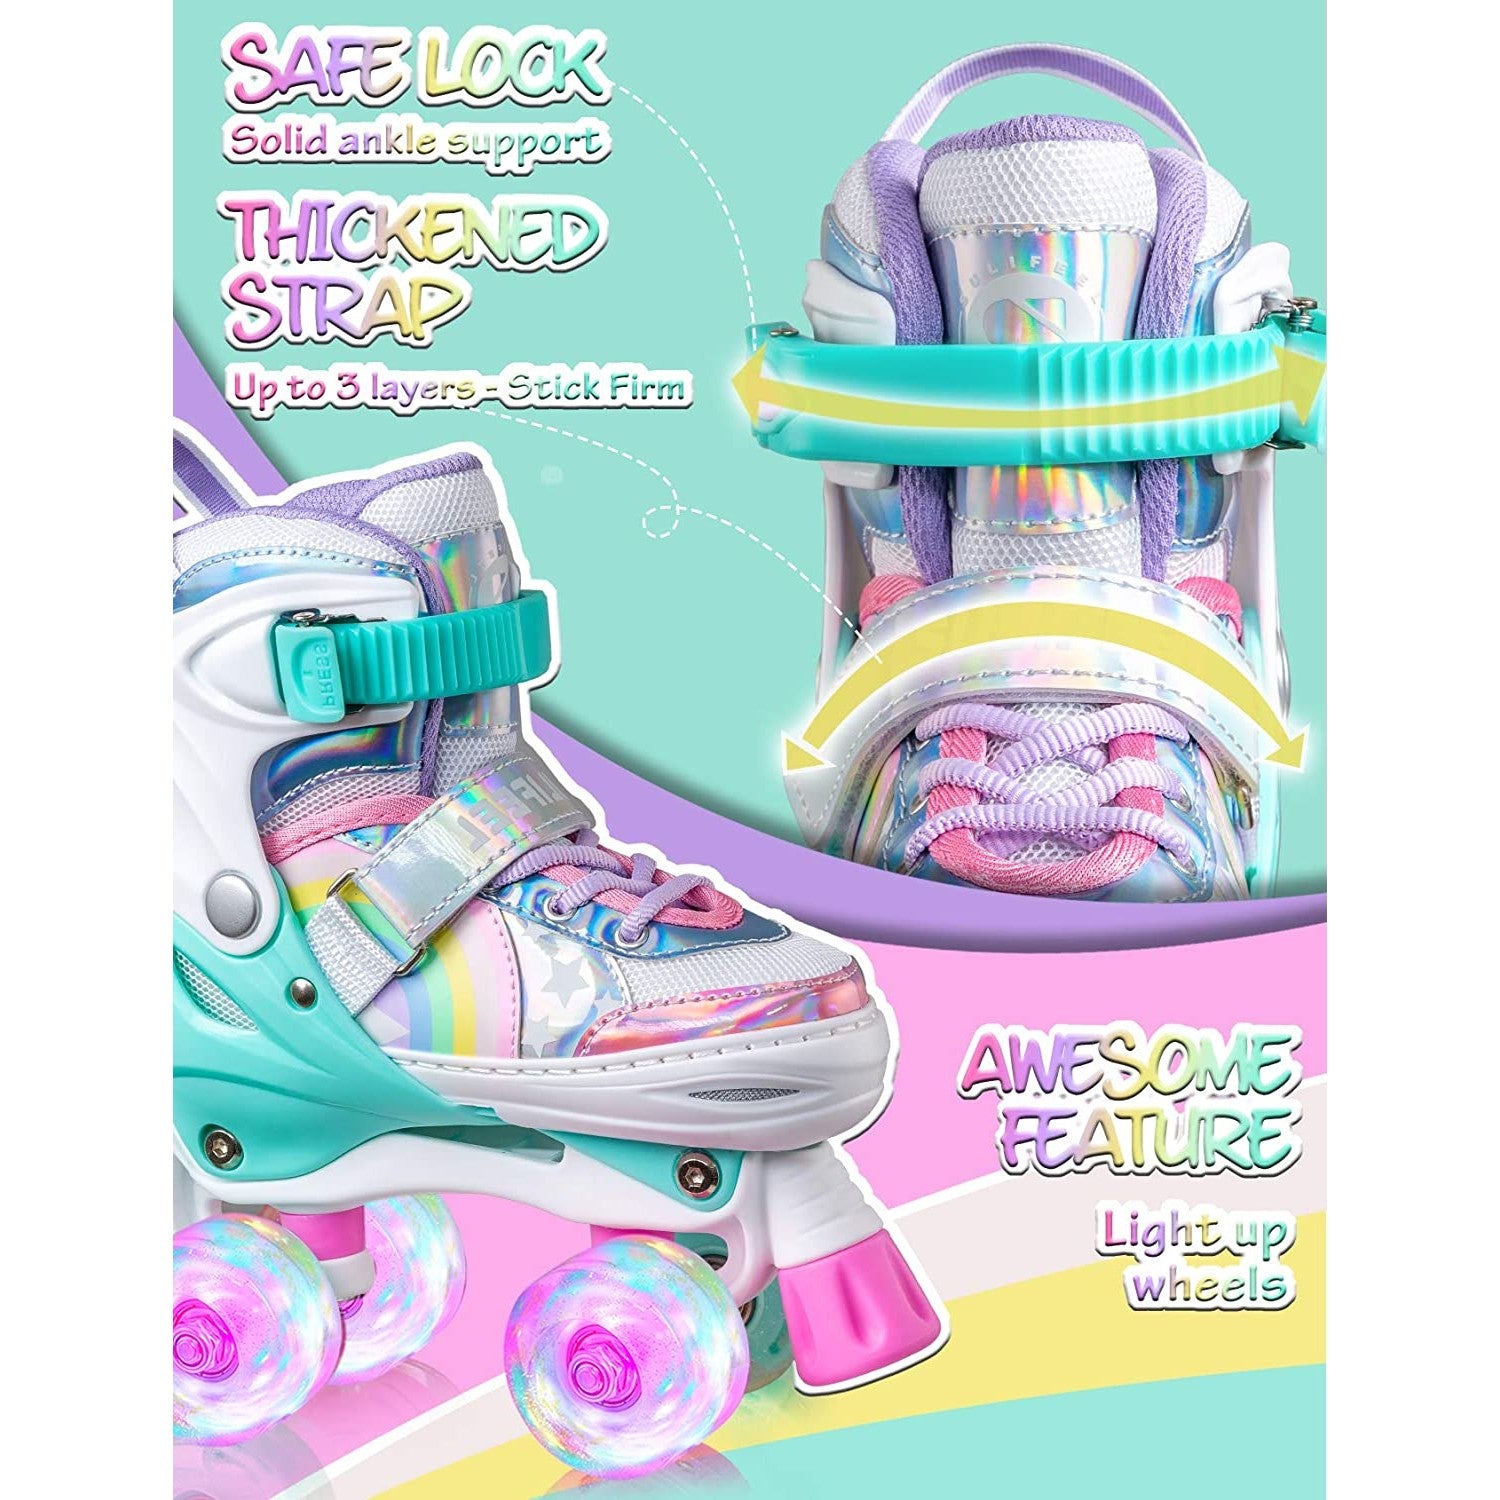 Product information for a pair of kids rainbow unicorn roller skates.